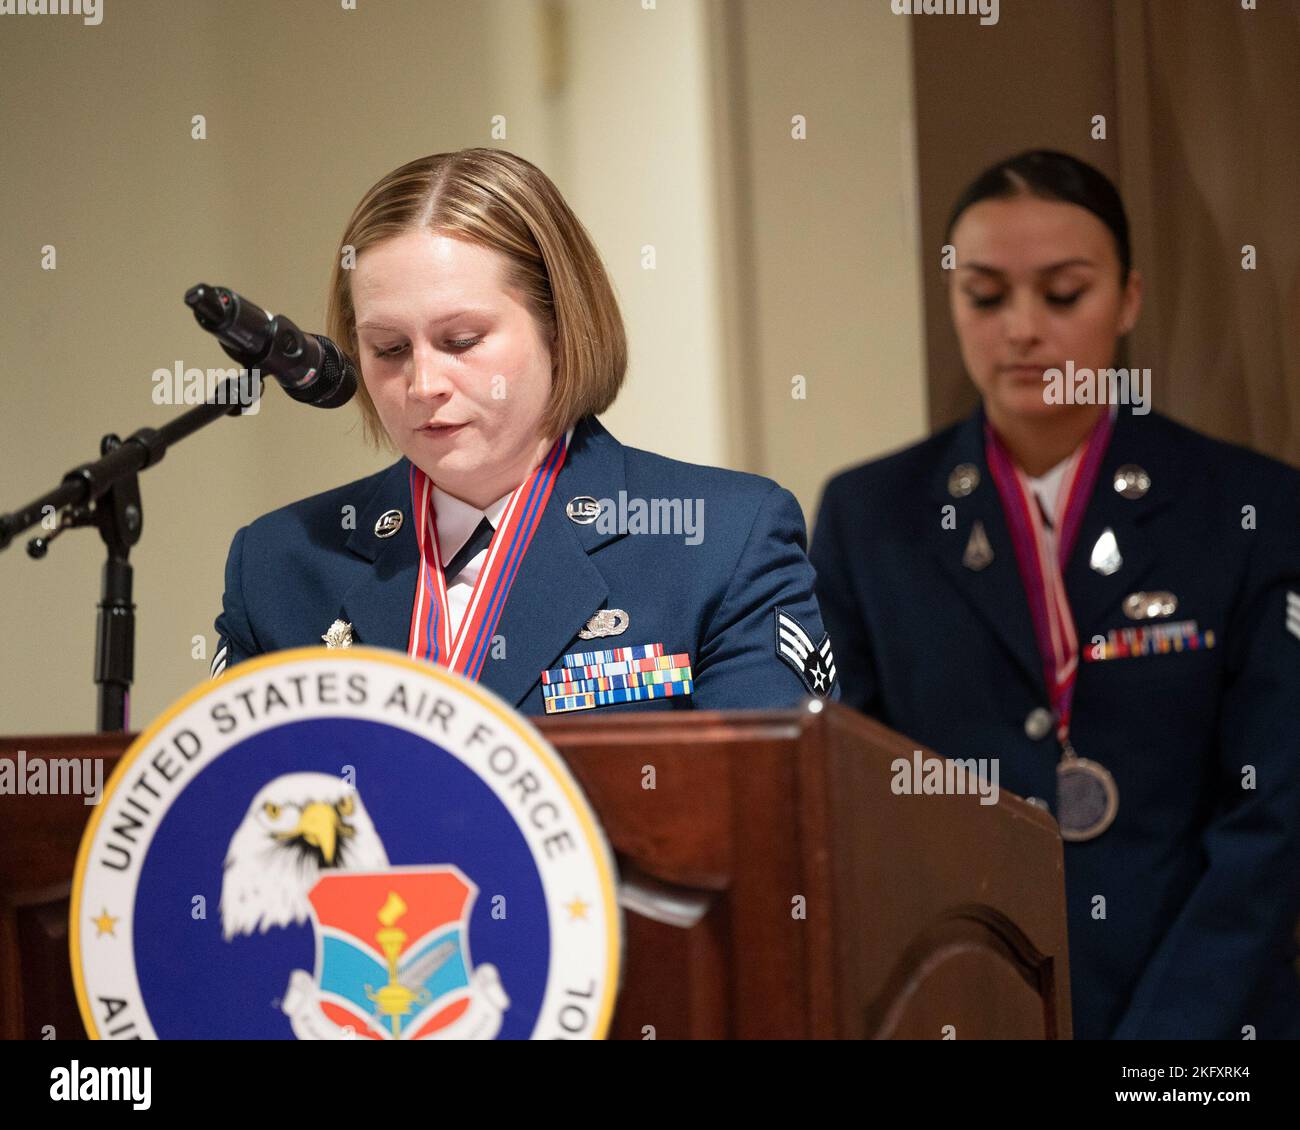 U.S. Air Force Senior Airman Nicolette Folck gives the benediction while U.S. Space Force Specialist 4 Monica Cisineros bows her head at the conclusion of  Grace A. Peterson Airman Leadership School class 22-G Oct. 13, 2022, at Wright-Patterson Air Force Base, Ohio. ALS is required for senior airmen selected for staff sergeant to teach them about leadership and Air Force culture and is open to eligible civilians. Stock Photo